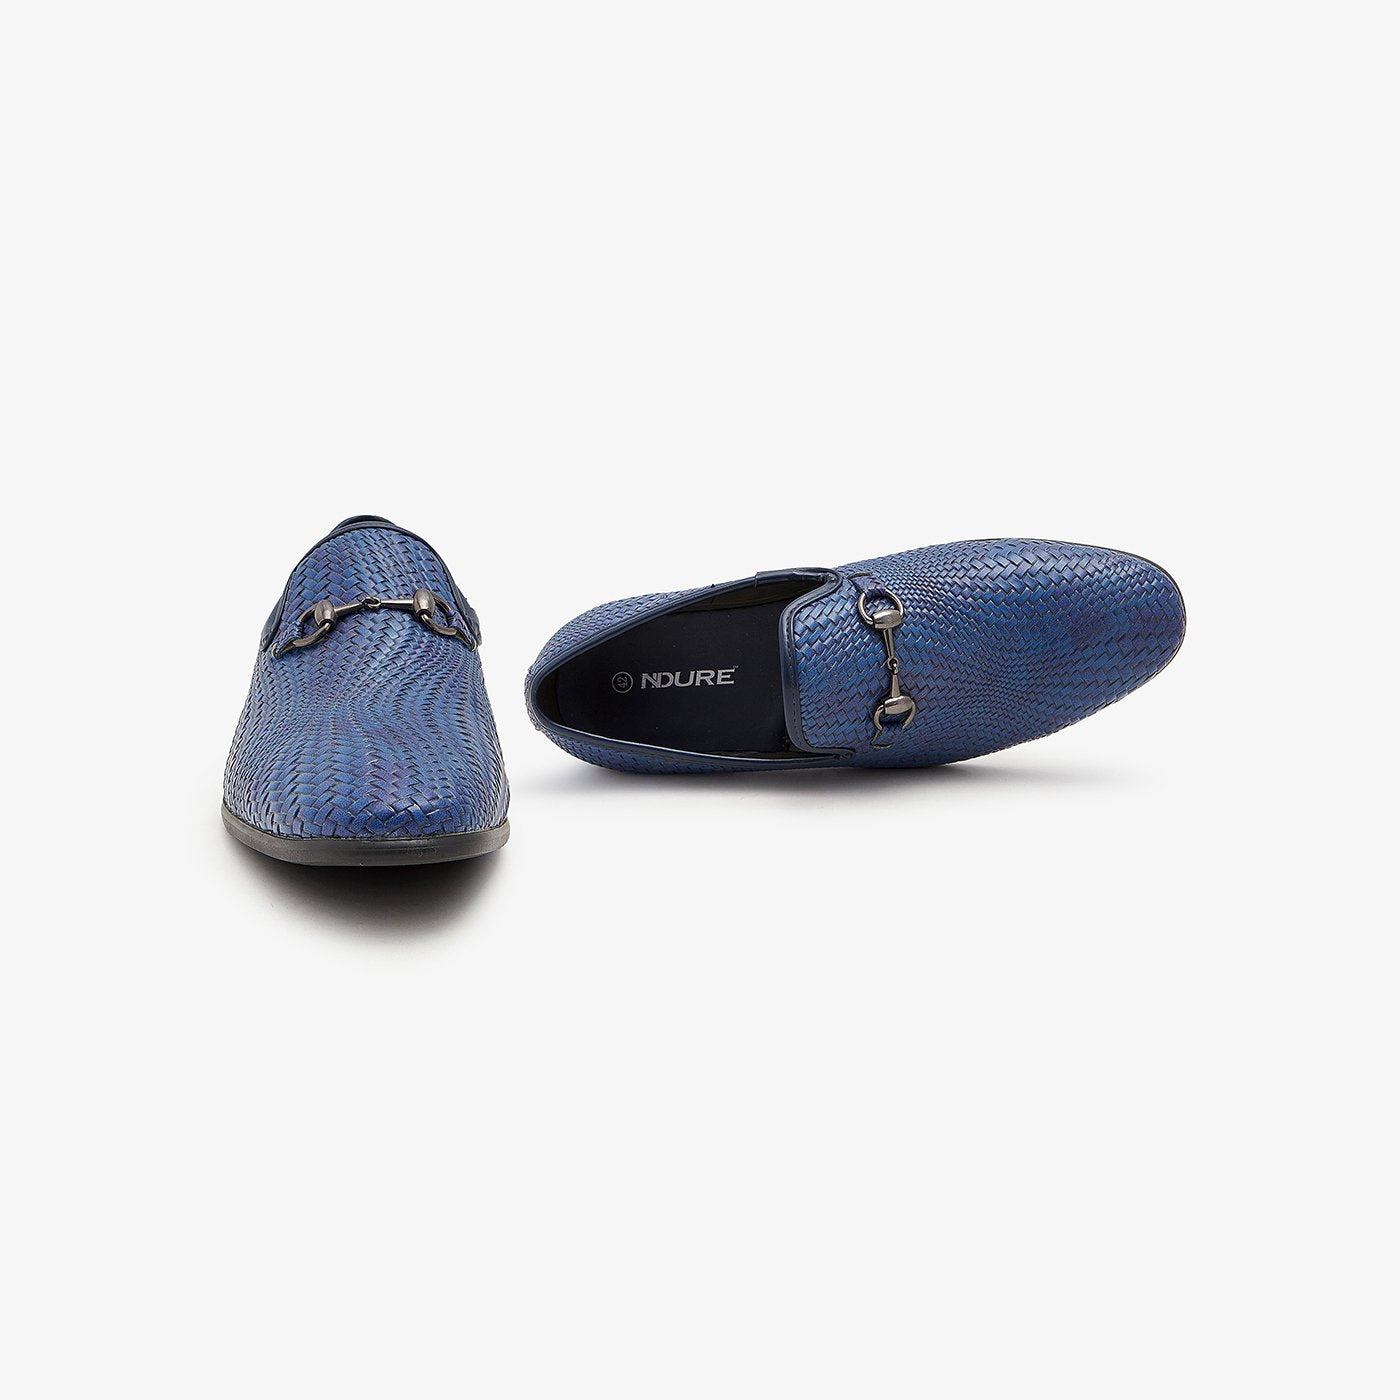 Mens Stylish Loafers